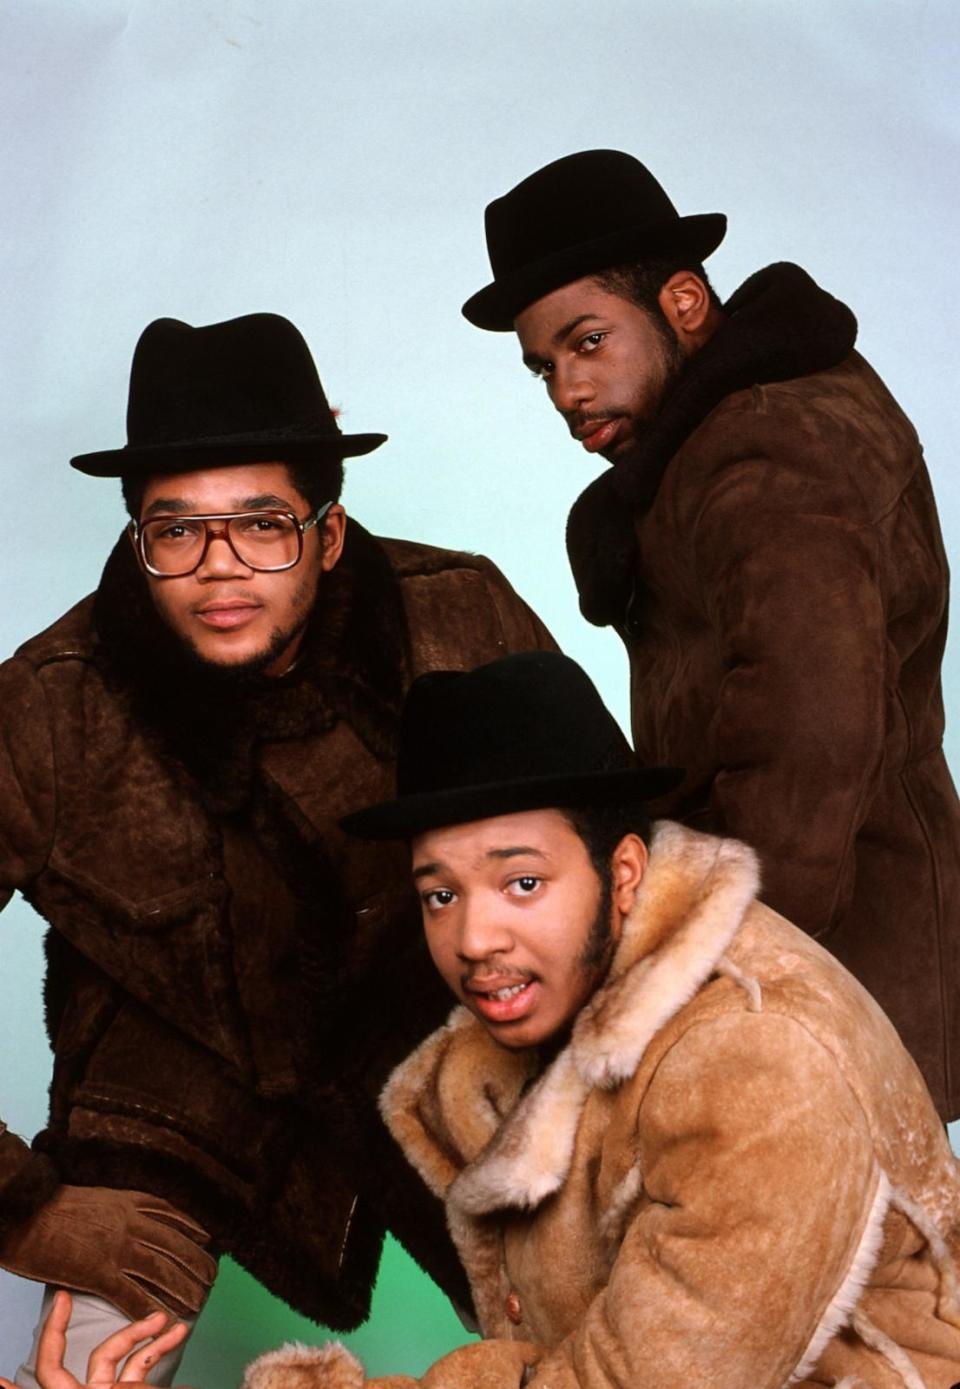 PHOTO: In this 1985 file photo, Darryl McDaniels, left, Joseph Simmons, center, and Jam Master Jay of the hip-hop group Run-D.M.C. pose for a studio portrait session in New York. (Michael Ochs Archives/Getty Images, FILE)